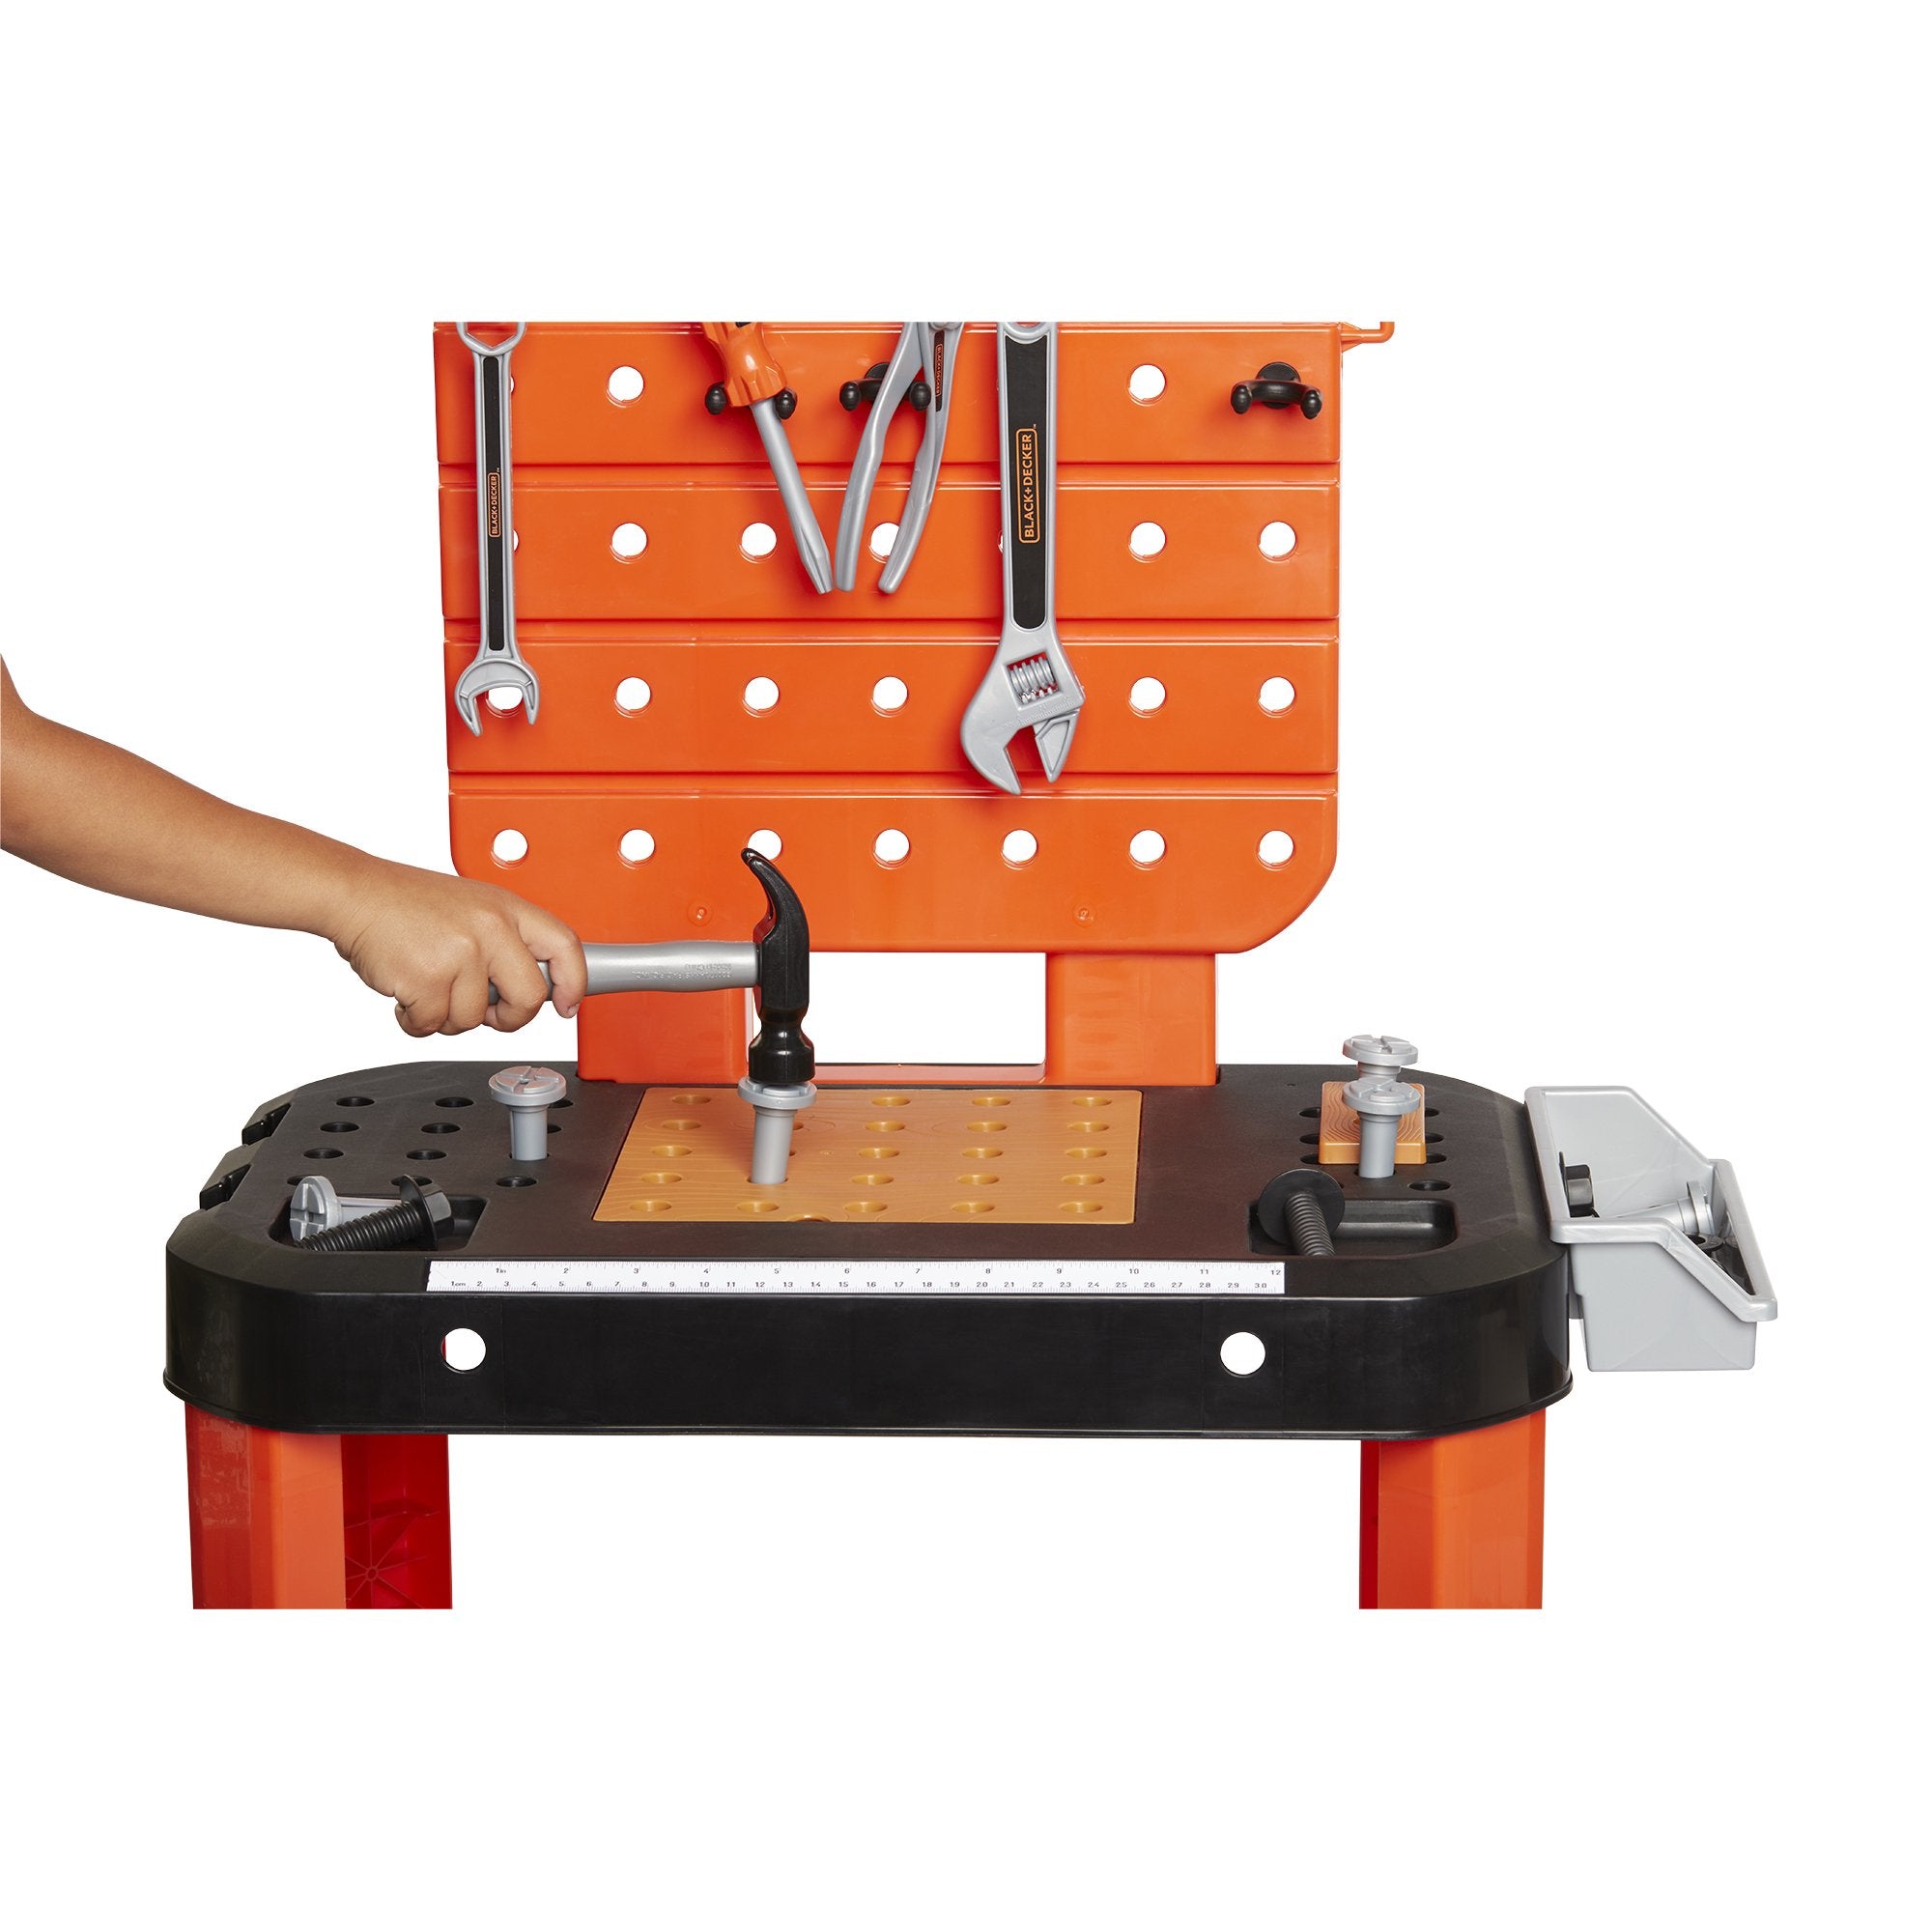 Black and Decker Junior Carrying Case Workbench, with100 Play Tools and  Accessories includes Carrying Case and a Play Motorized Drill 